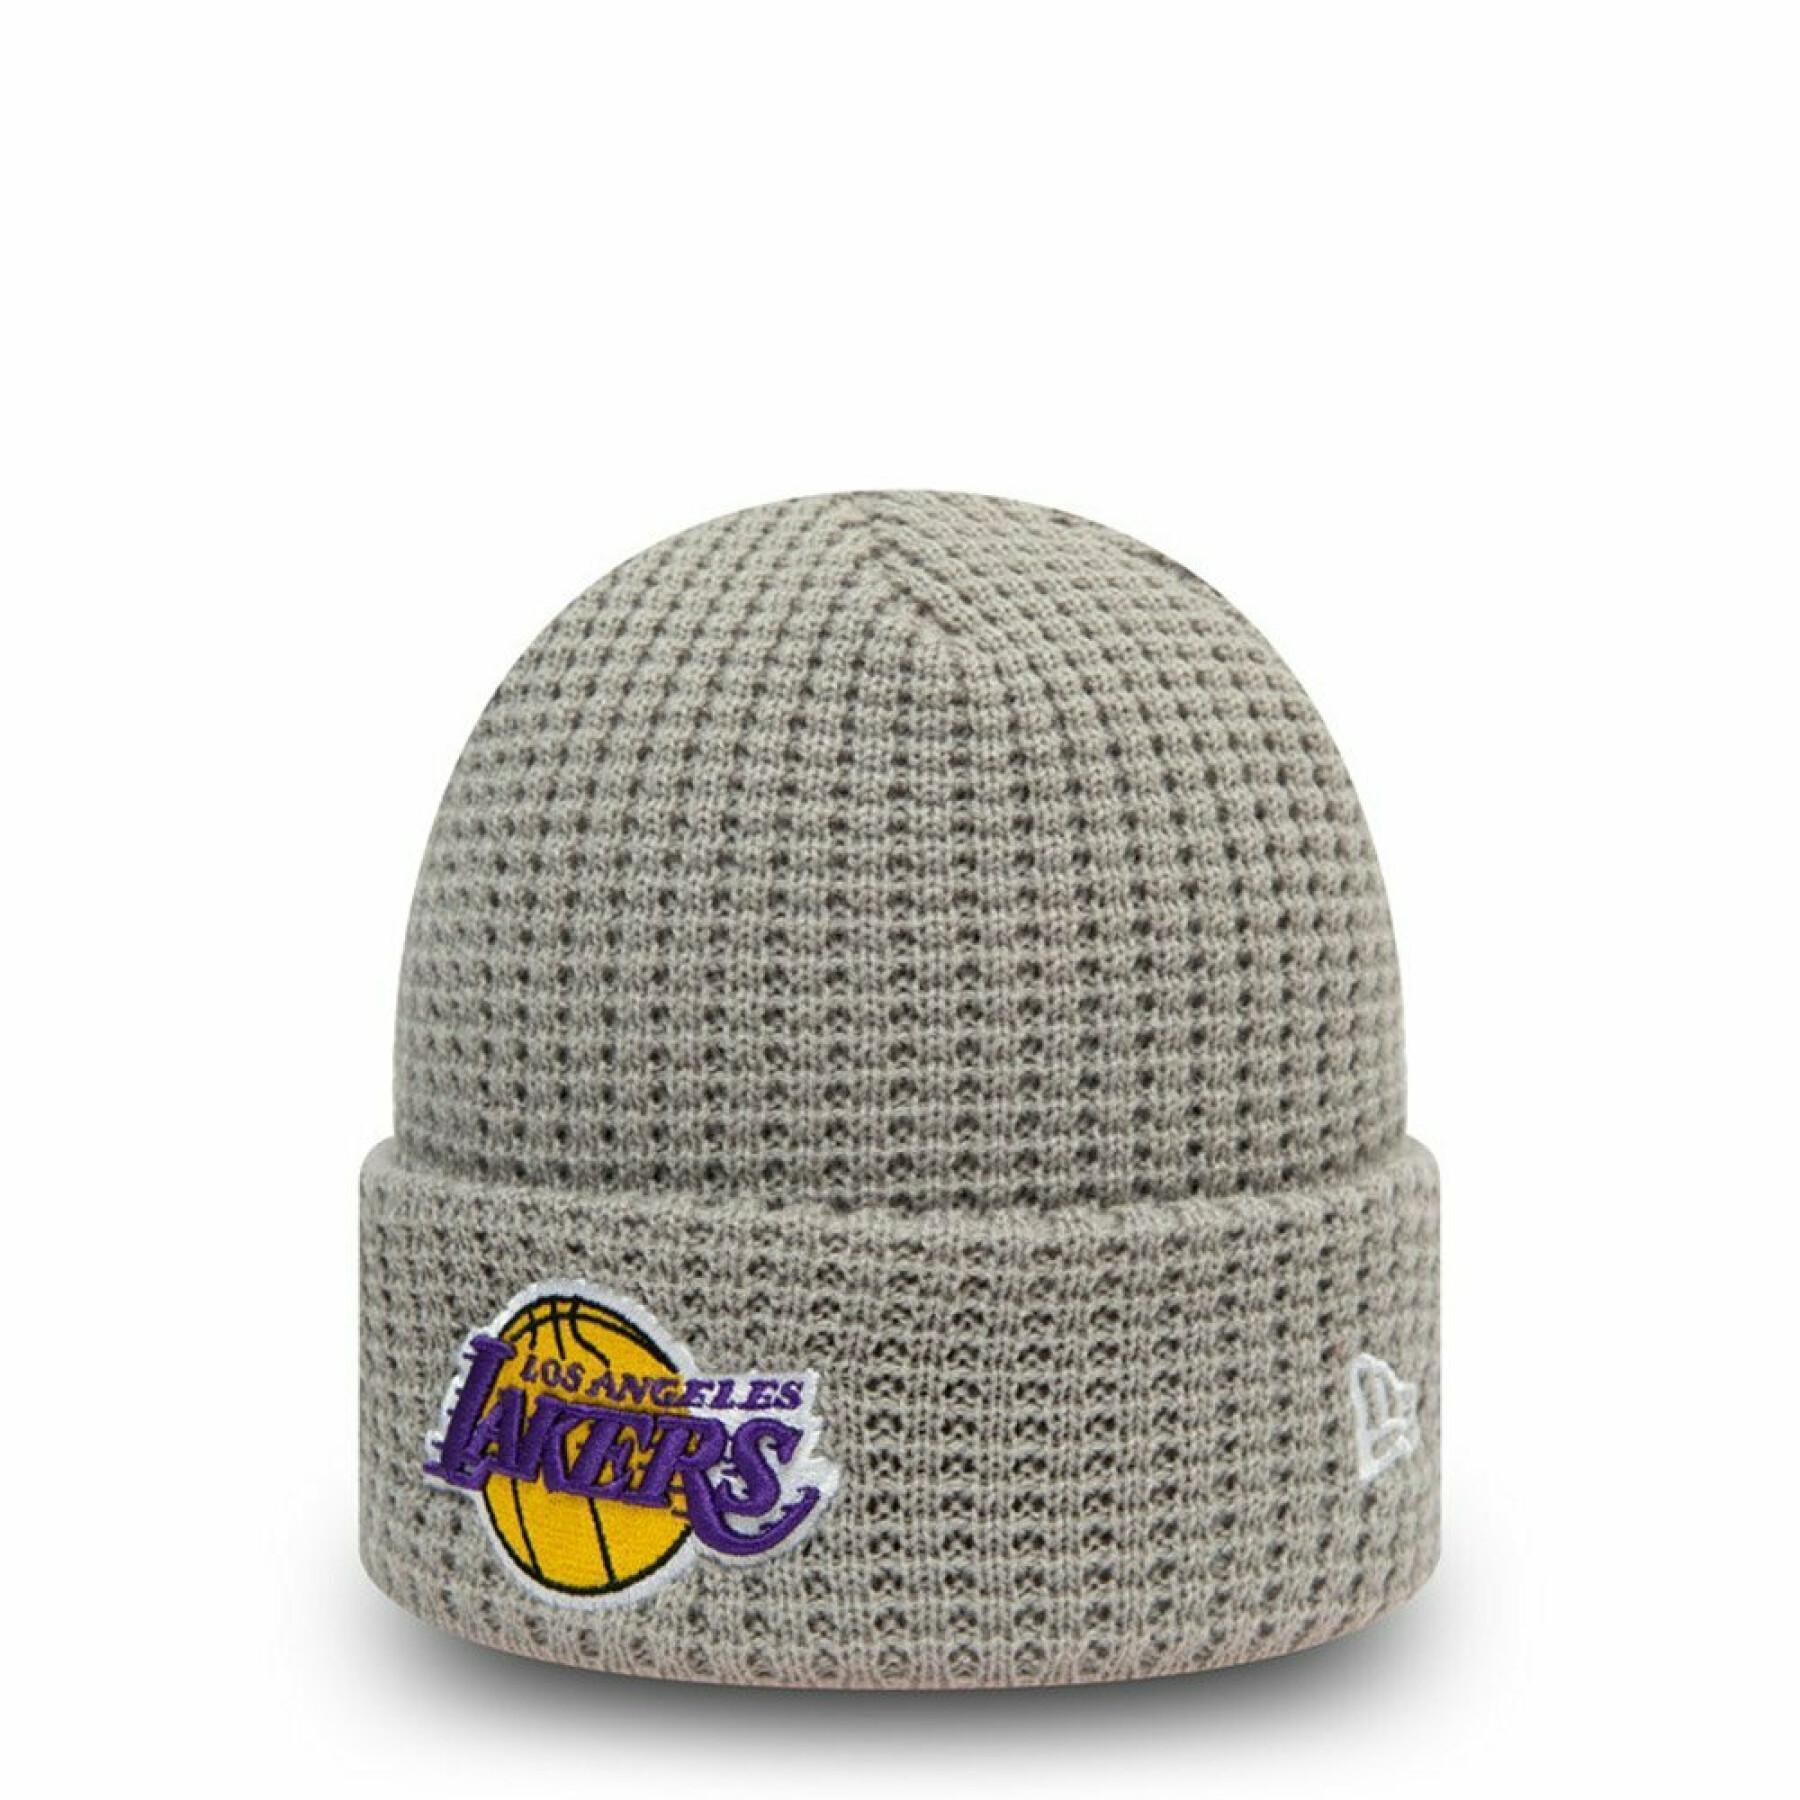 Official Los Angeles Lakers Beanies, Knit, Winter Hats